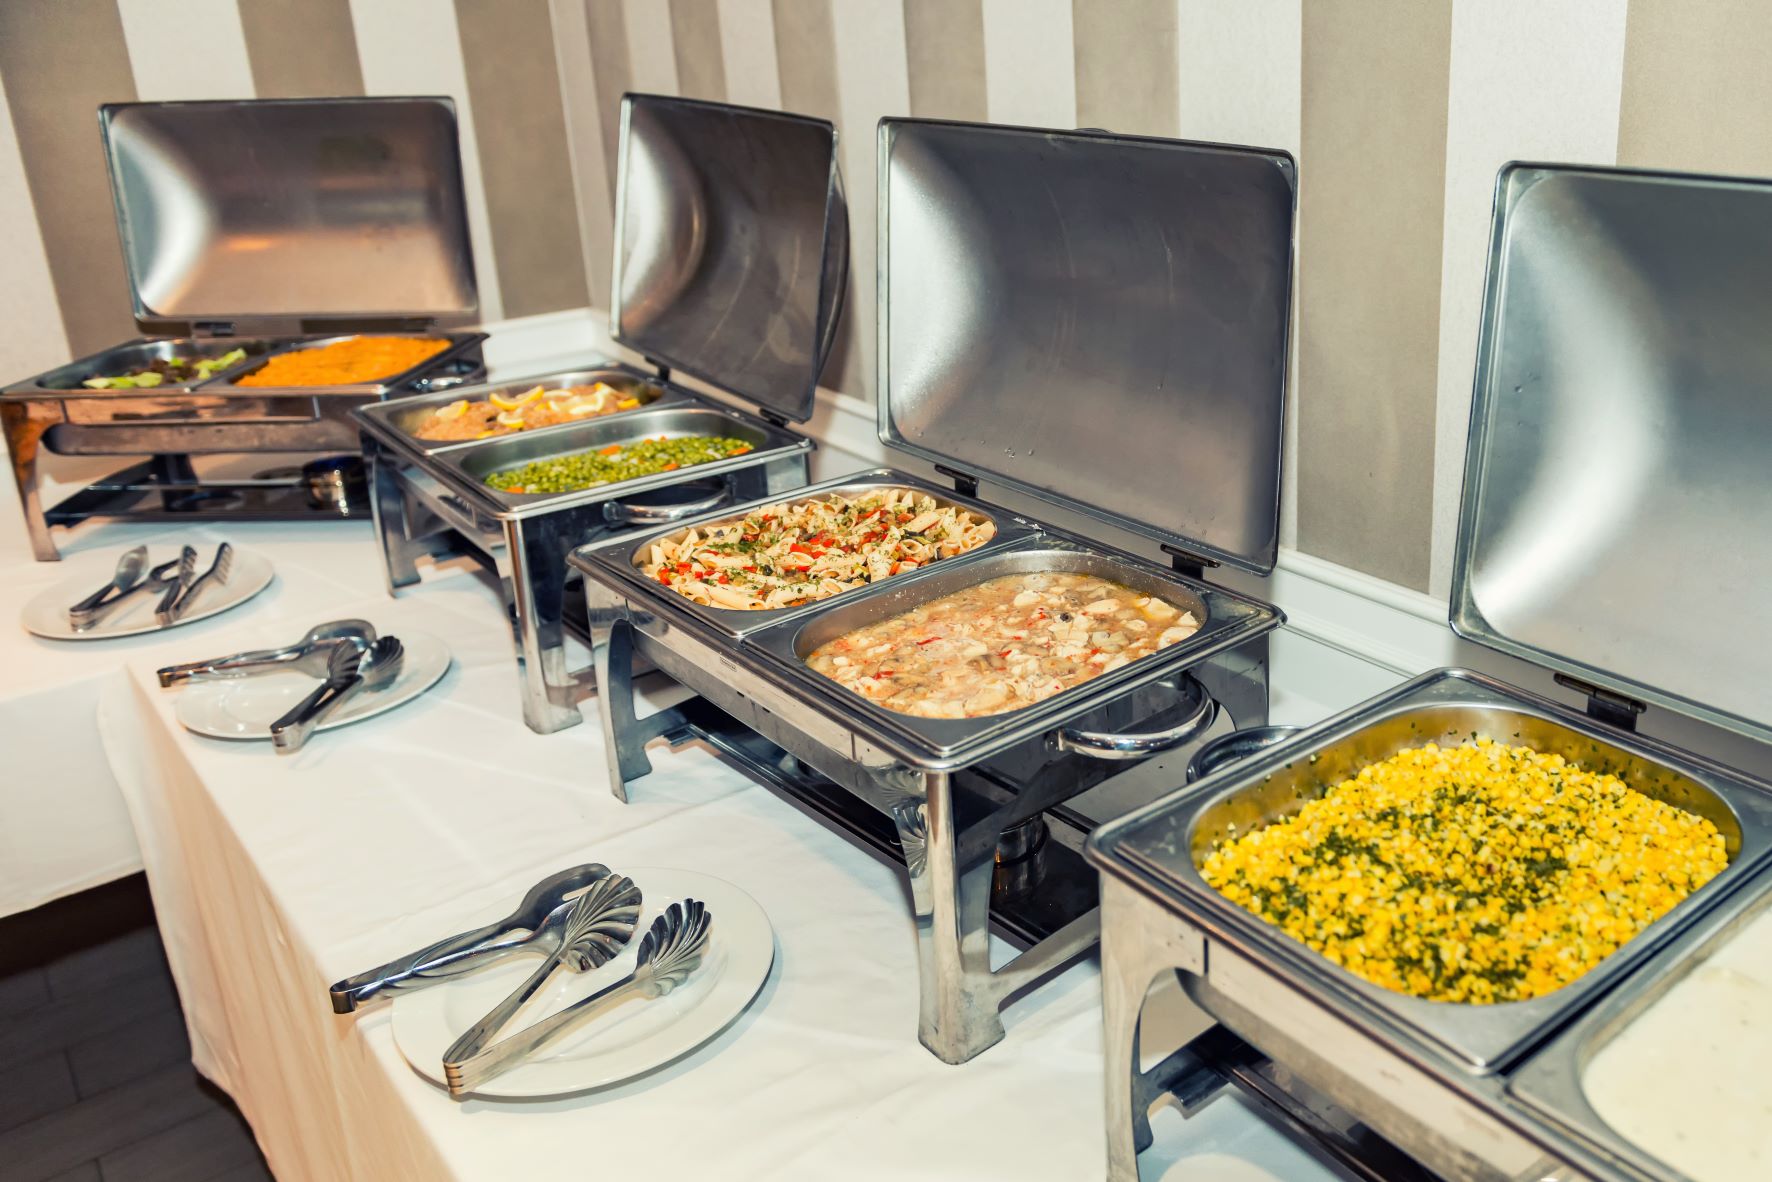 What is the key to success in catering